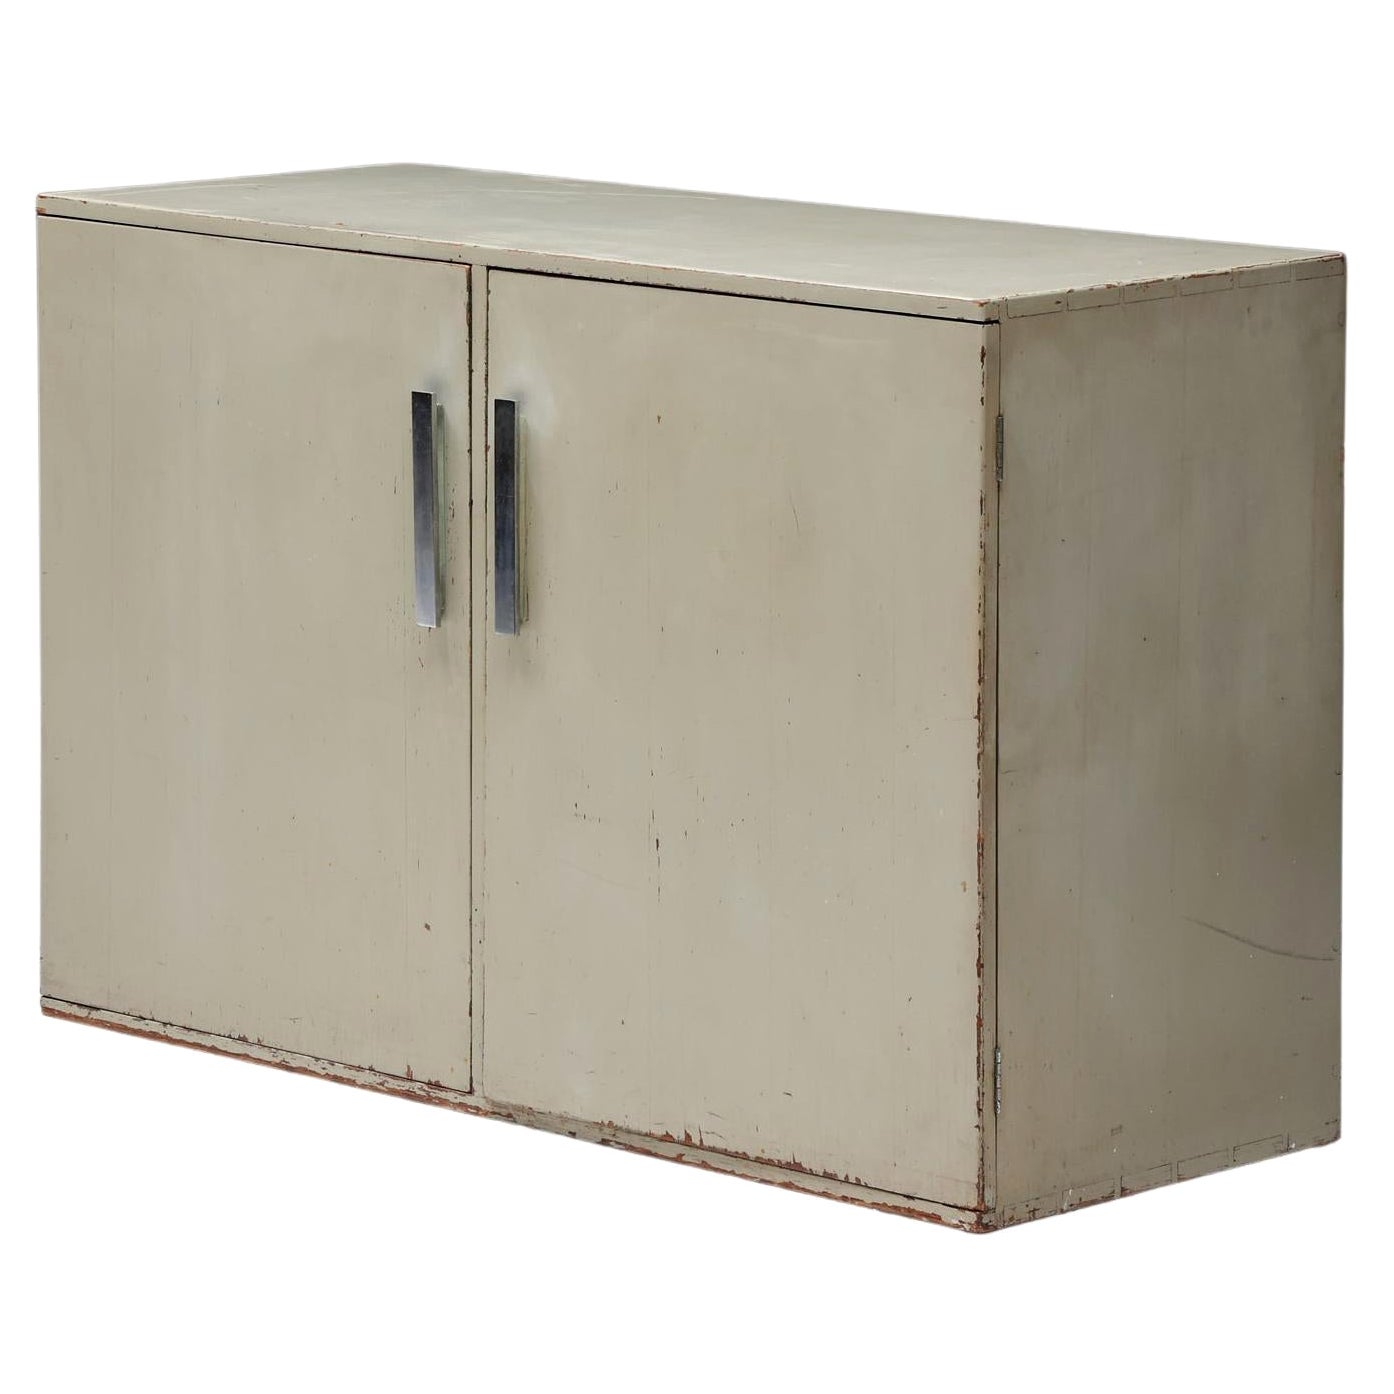 Gerald Summers Modernist Side Board, Grey Painted Wood, 1930s For Sale